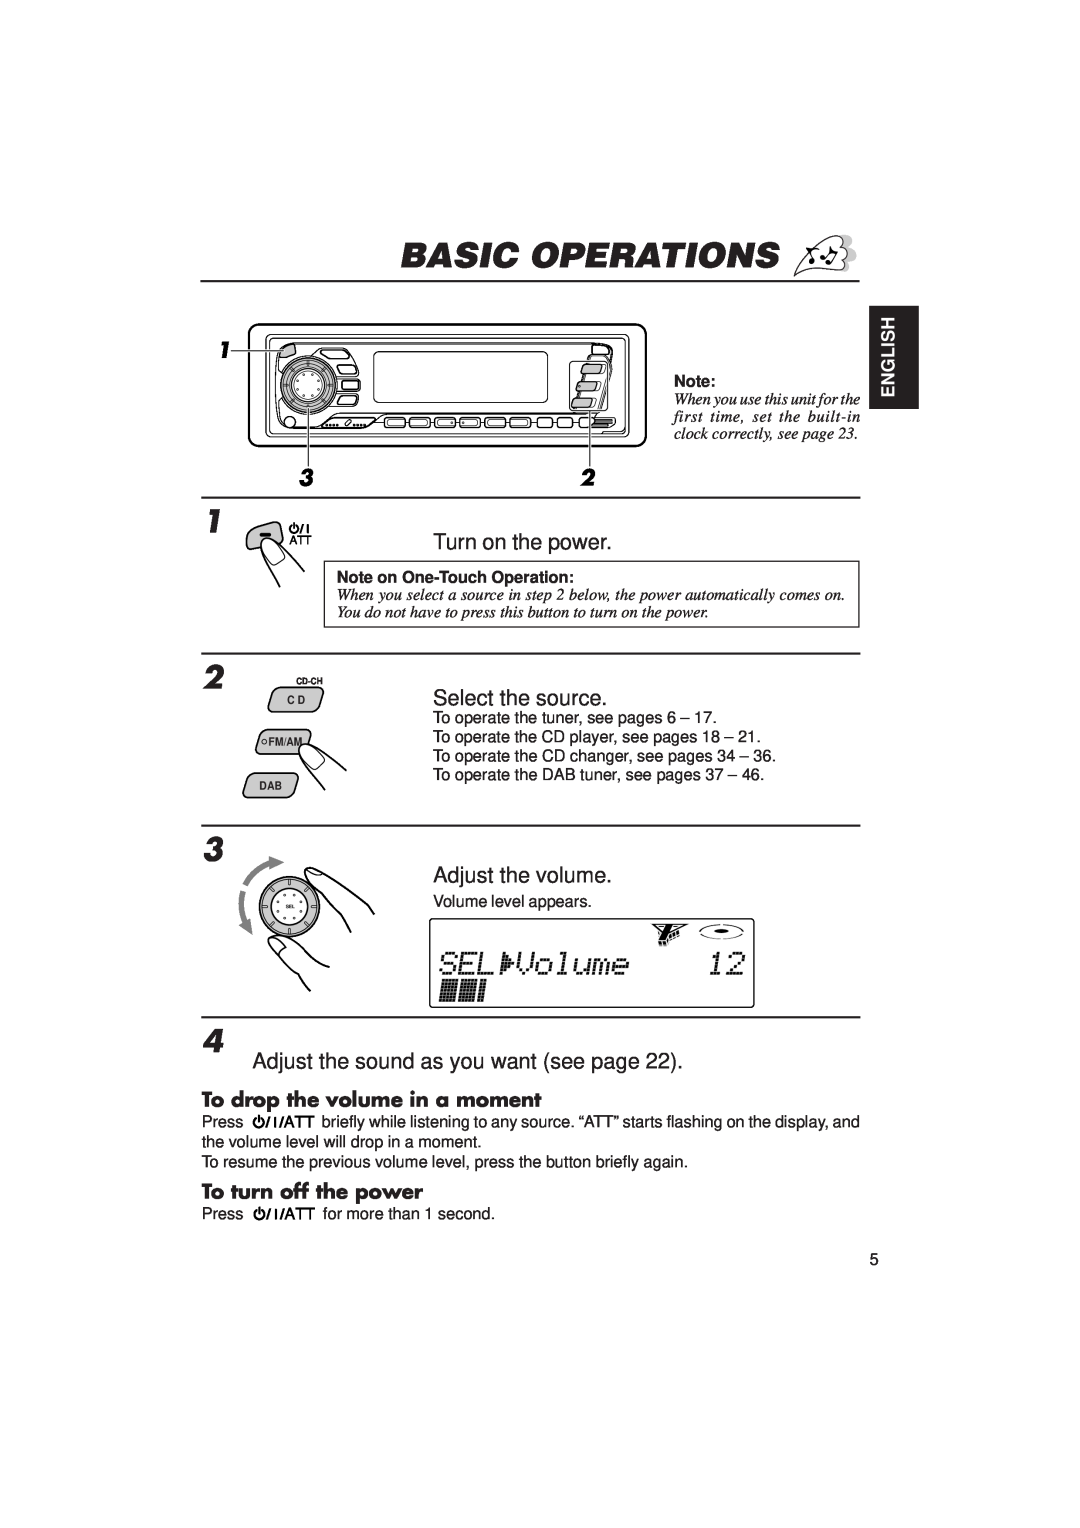 JVC KD-SX1500R Basic Operations, Turn on the power, Select the source, Adjust the volume, To drop the volume in a moment 